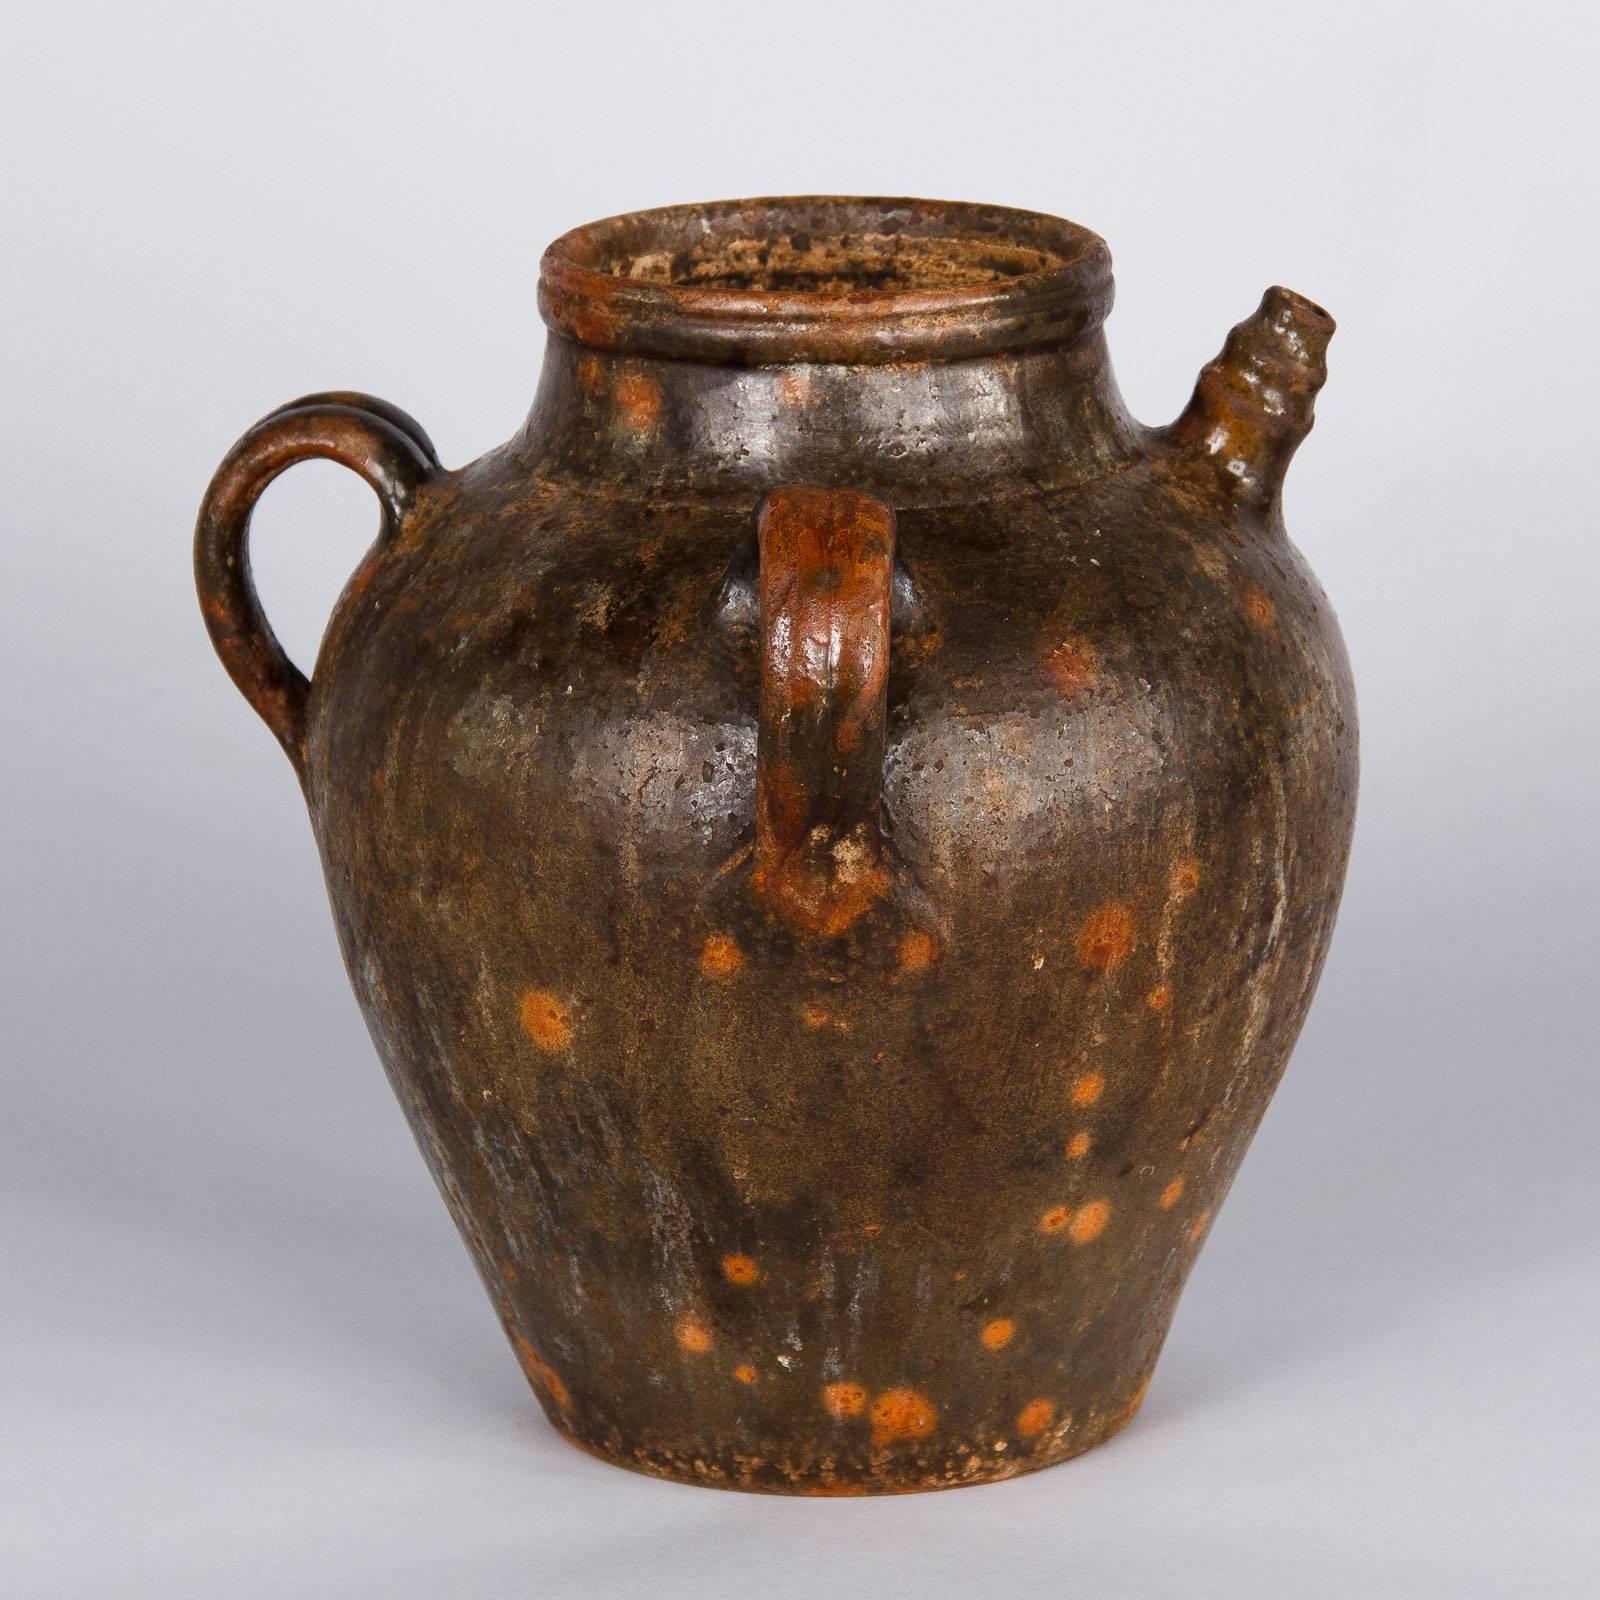 19th Century French Earthenware Water Jar, Late 1800s